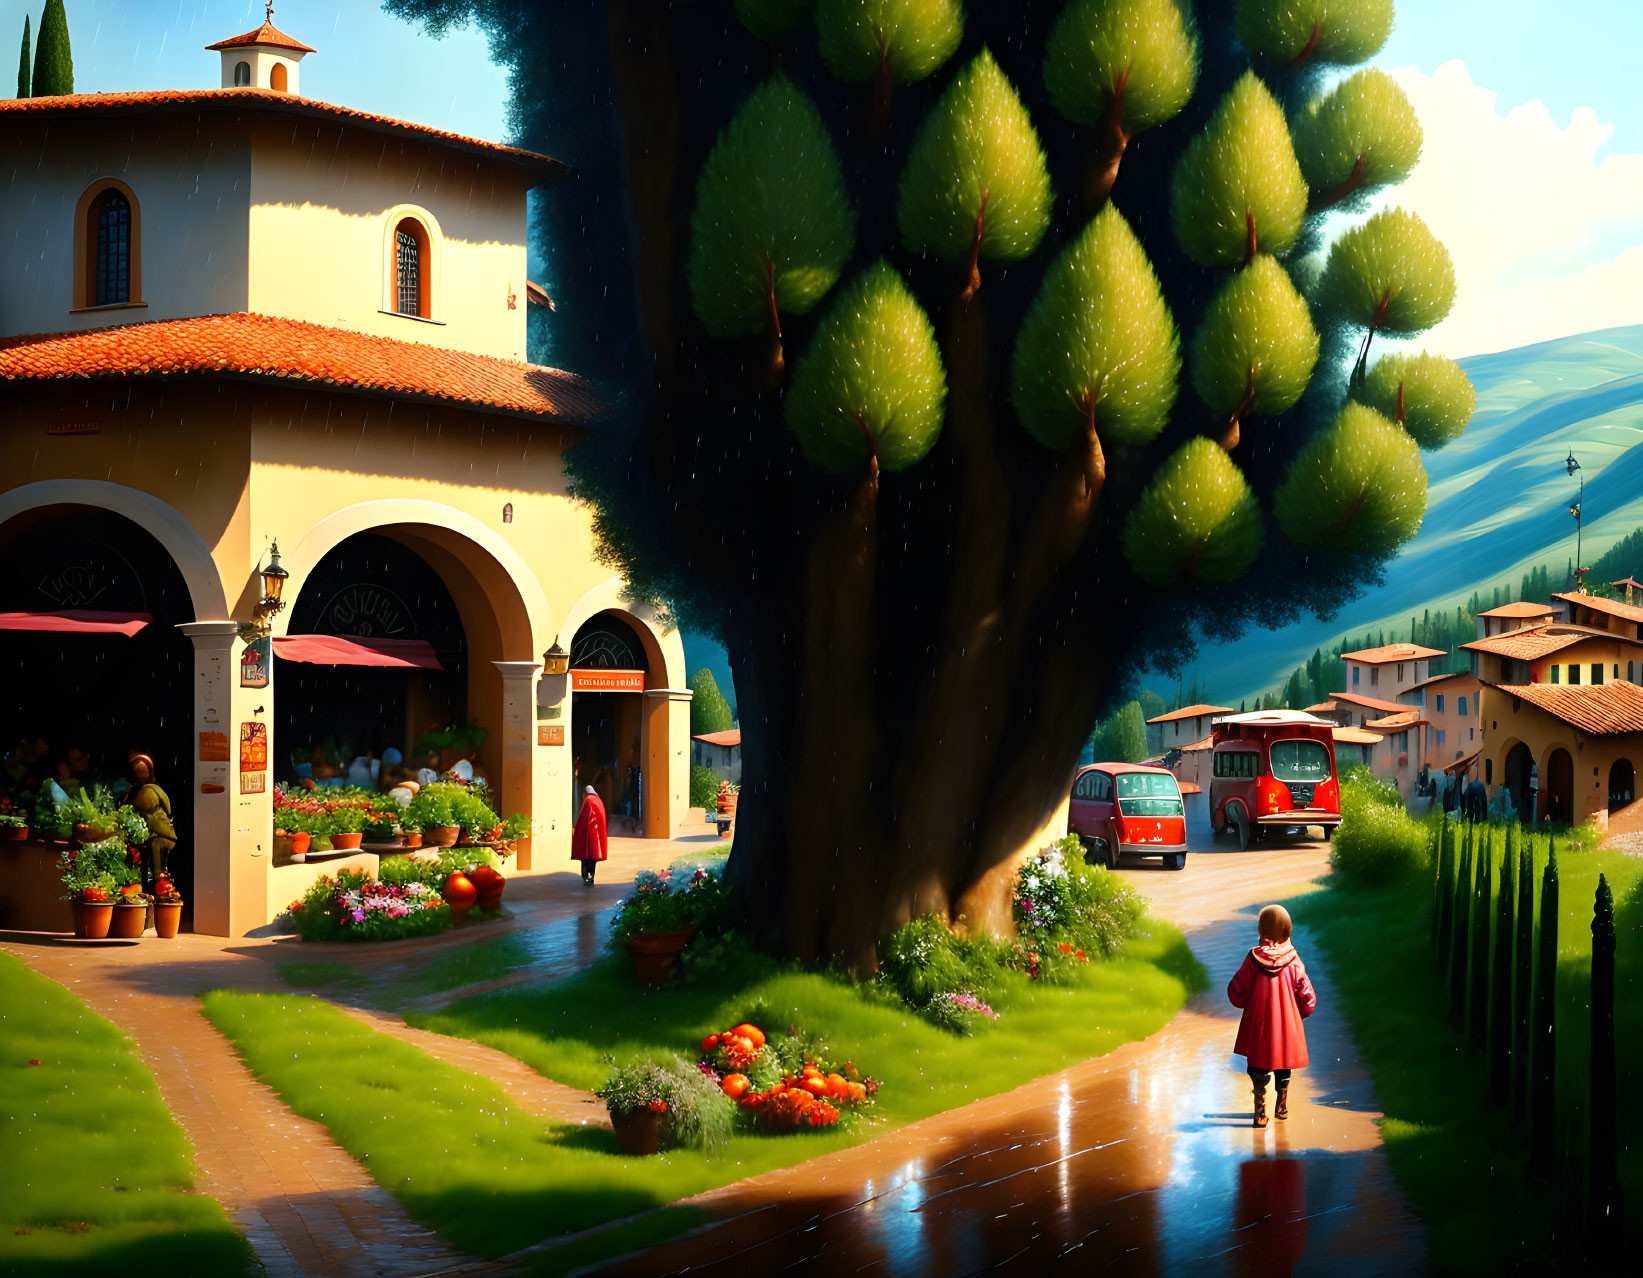 Colorful town scene with tree, flowers, market, and people under warm sunlight